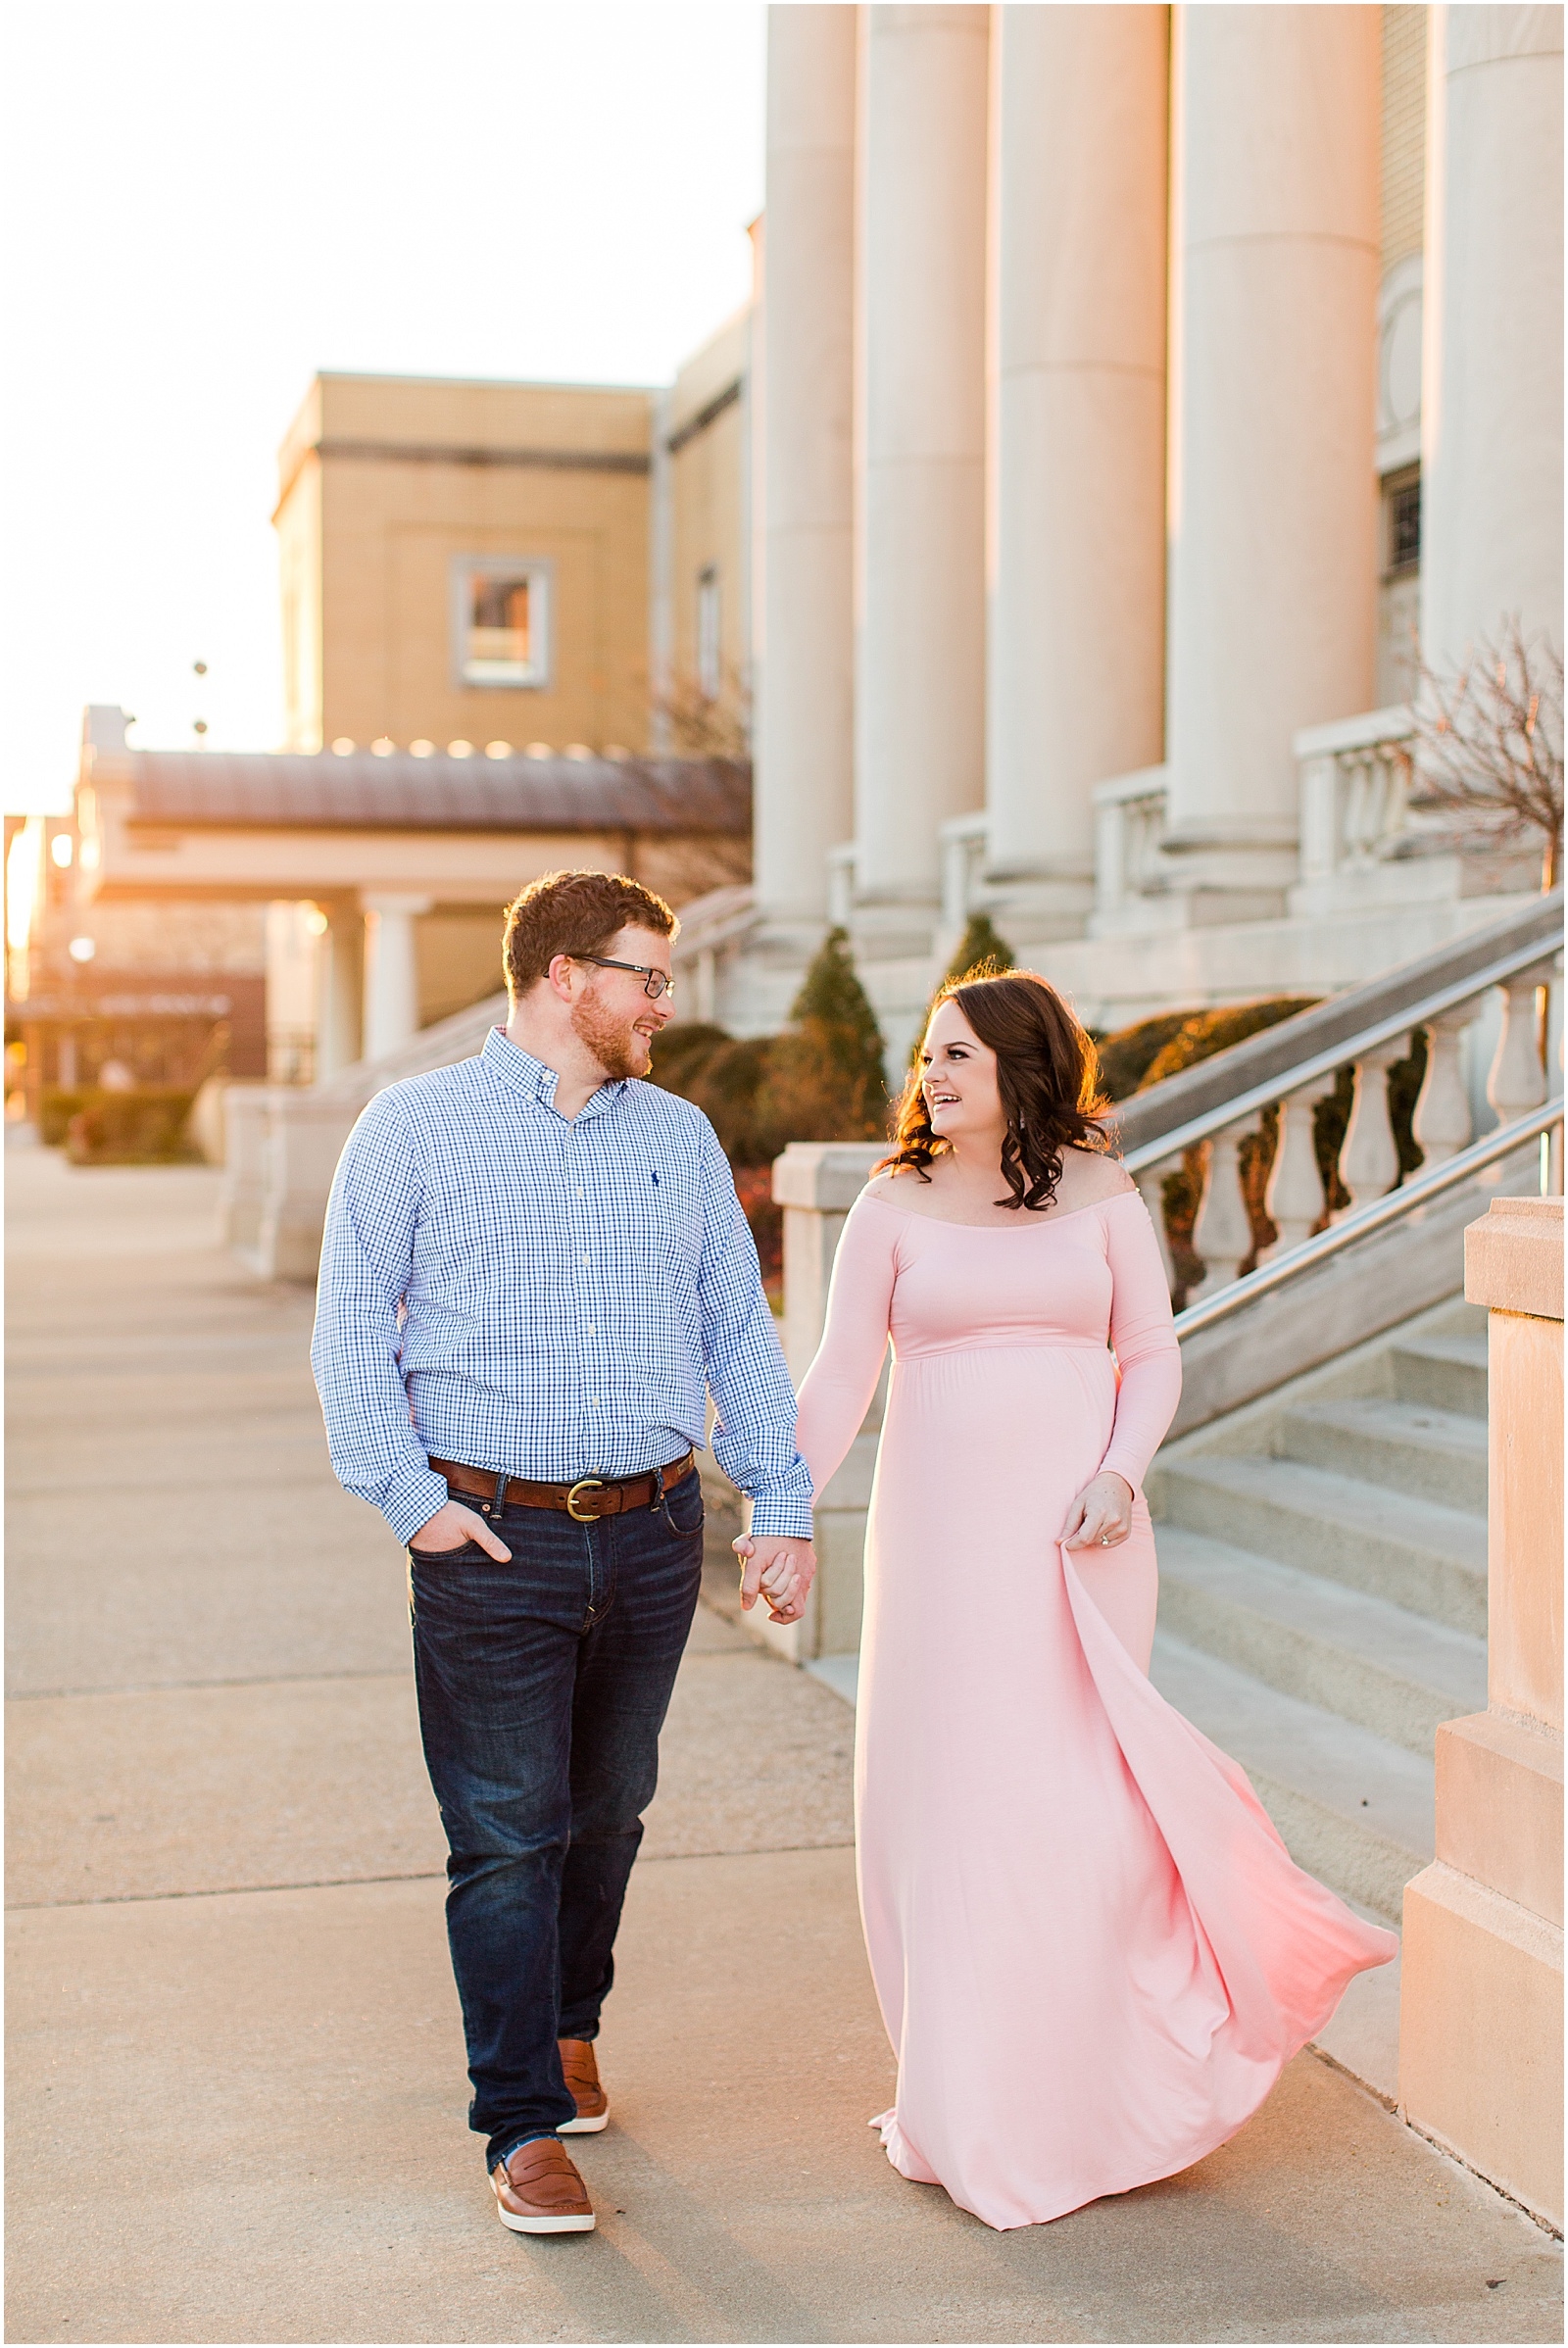 A Downtown Owensboro Maternity Session | Kayla and Grant Evansville Indiana Wedding Photographers-0009.jpg